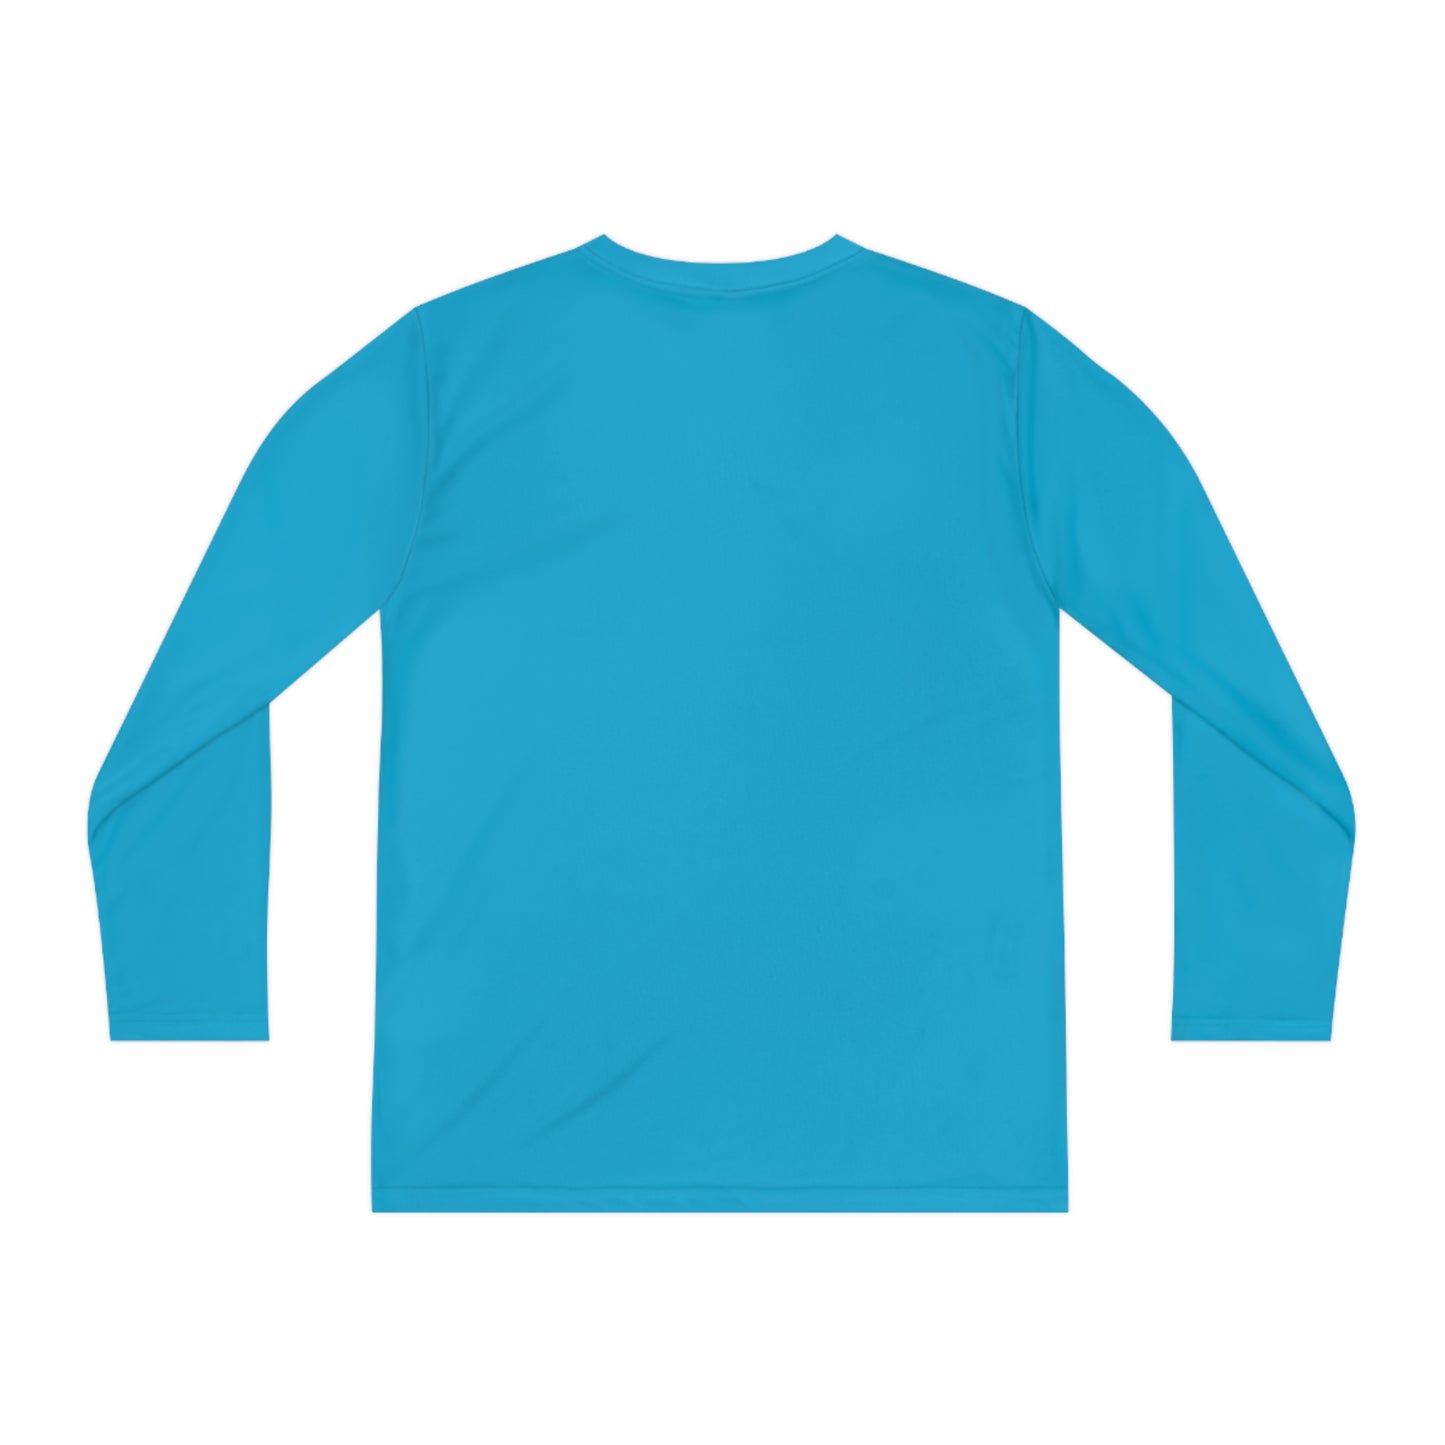 Youth Long Sleeve Competitor Tee - Limitless